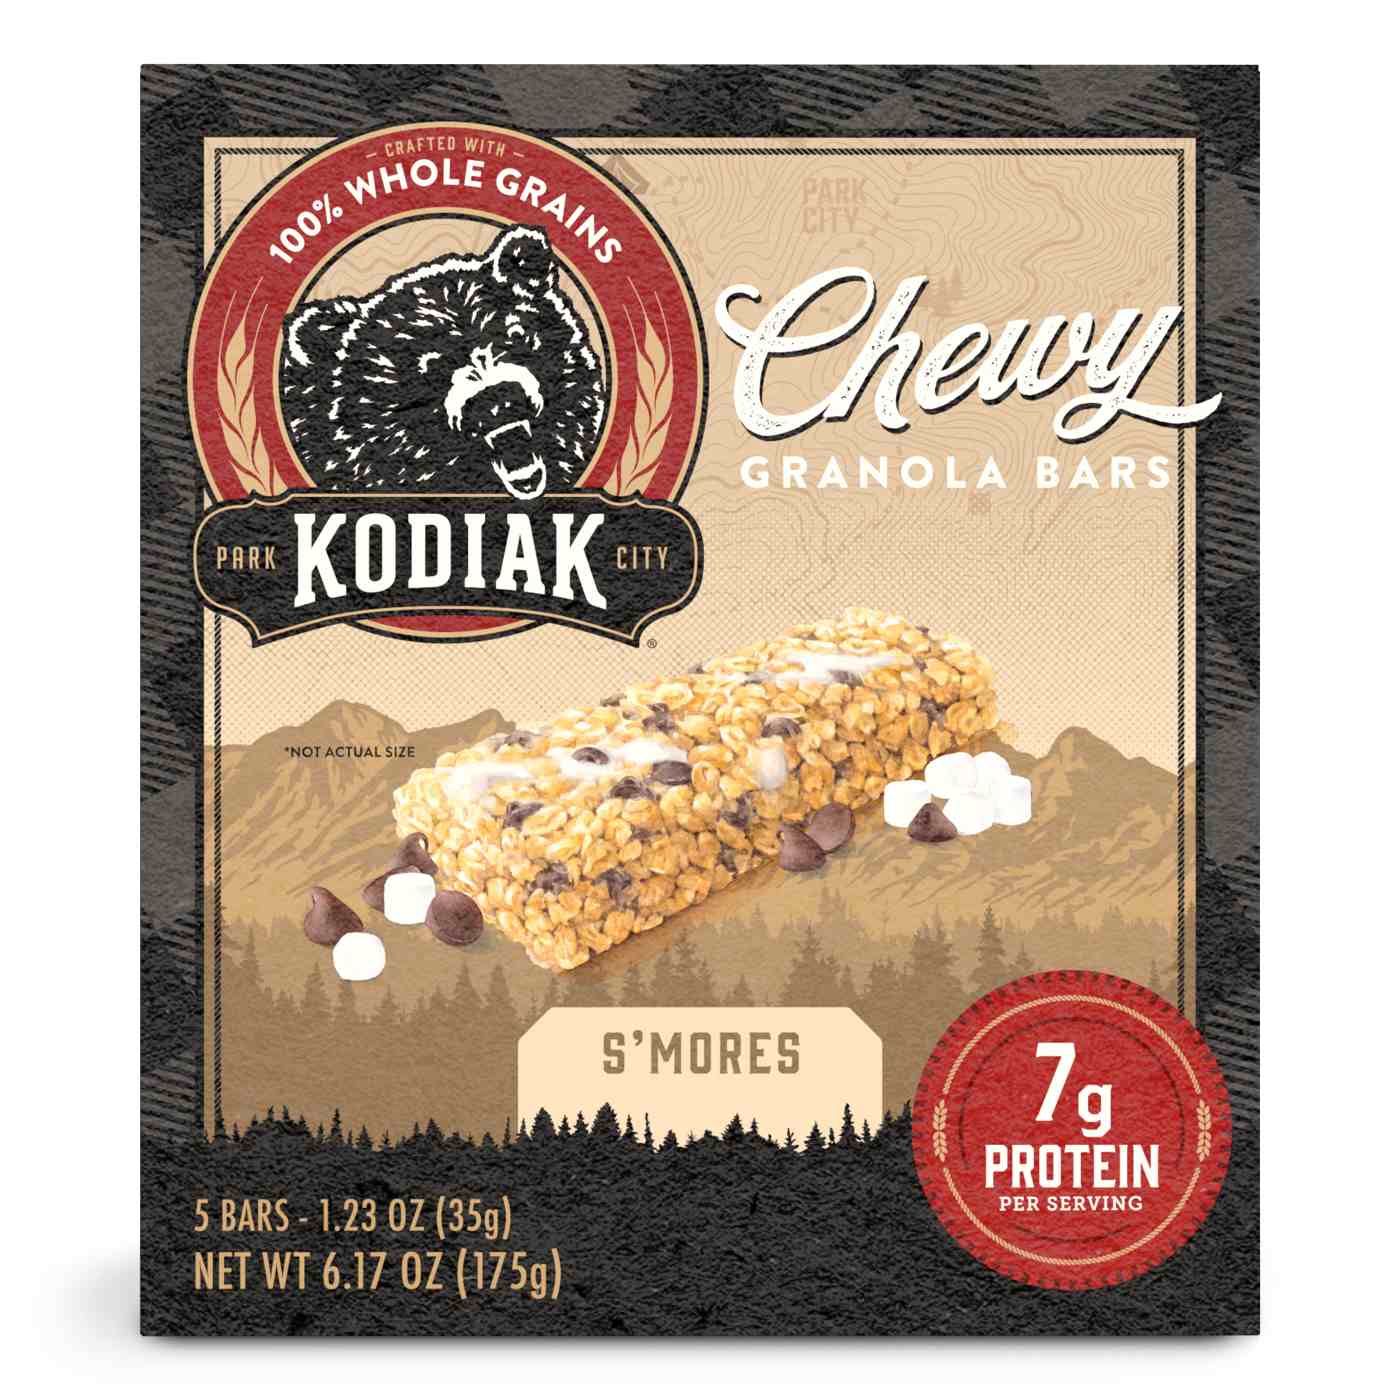 Kodiak 7g Protein Chewy Granola Bars - S'mores; image 1 of 2